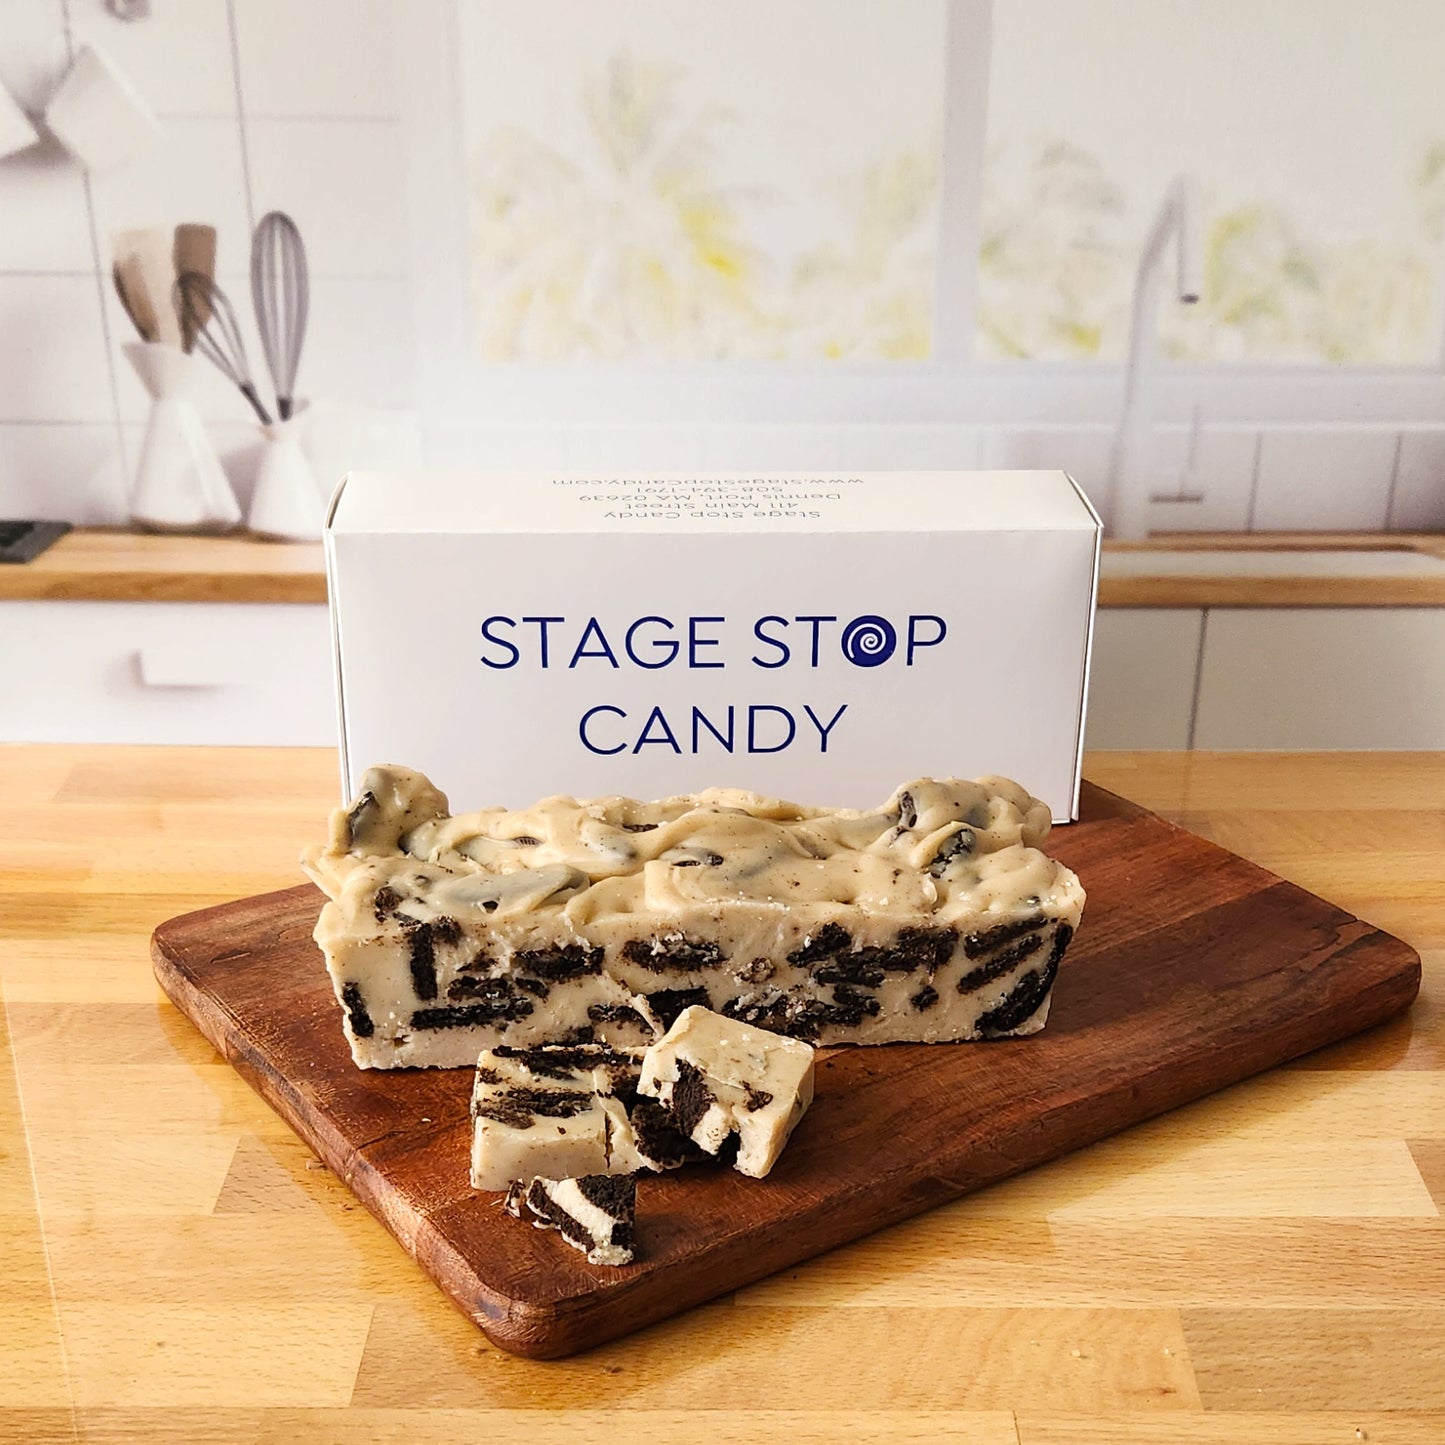 Creamy Vanilla Fudge mixed with Oreo cookies creates a heavenly combination. Our Fudge is made daily in our copper kettle in small batches with the freshest ingredients. 